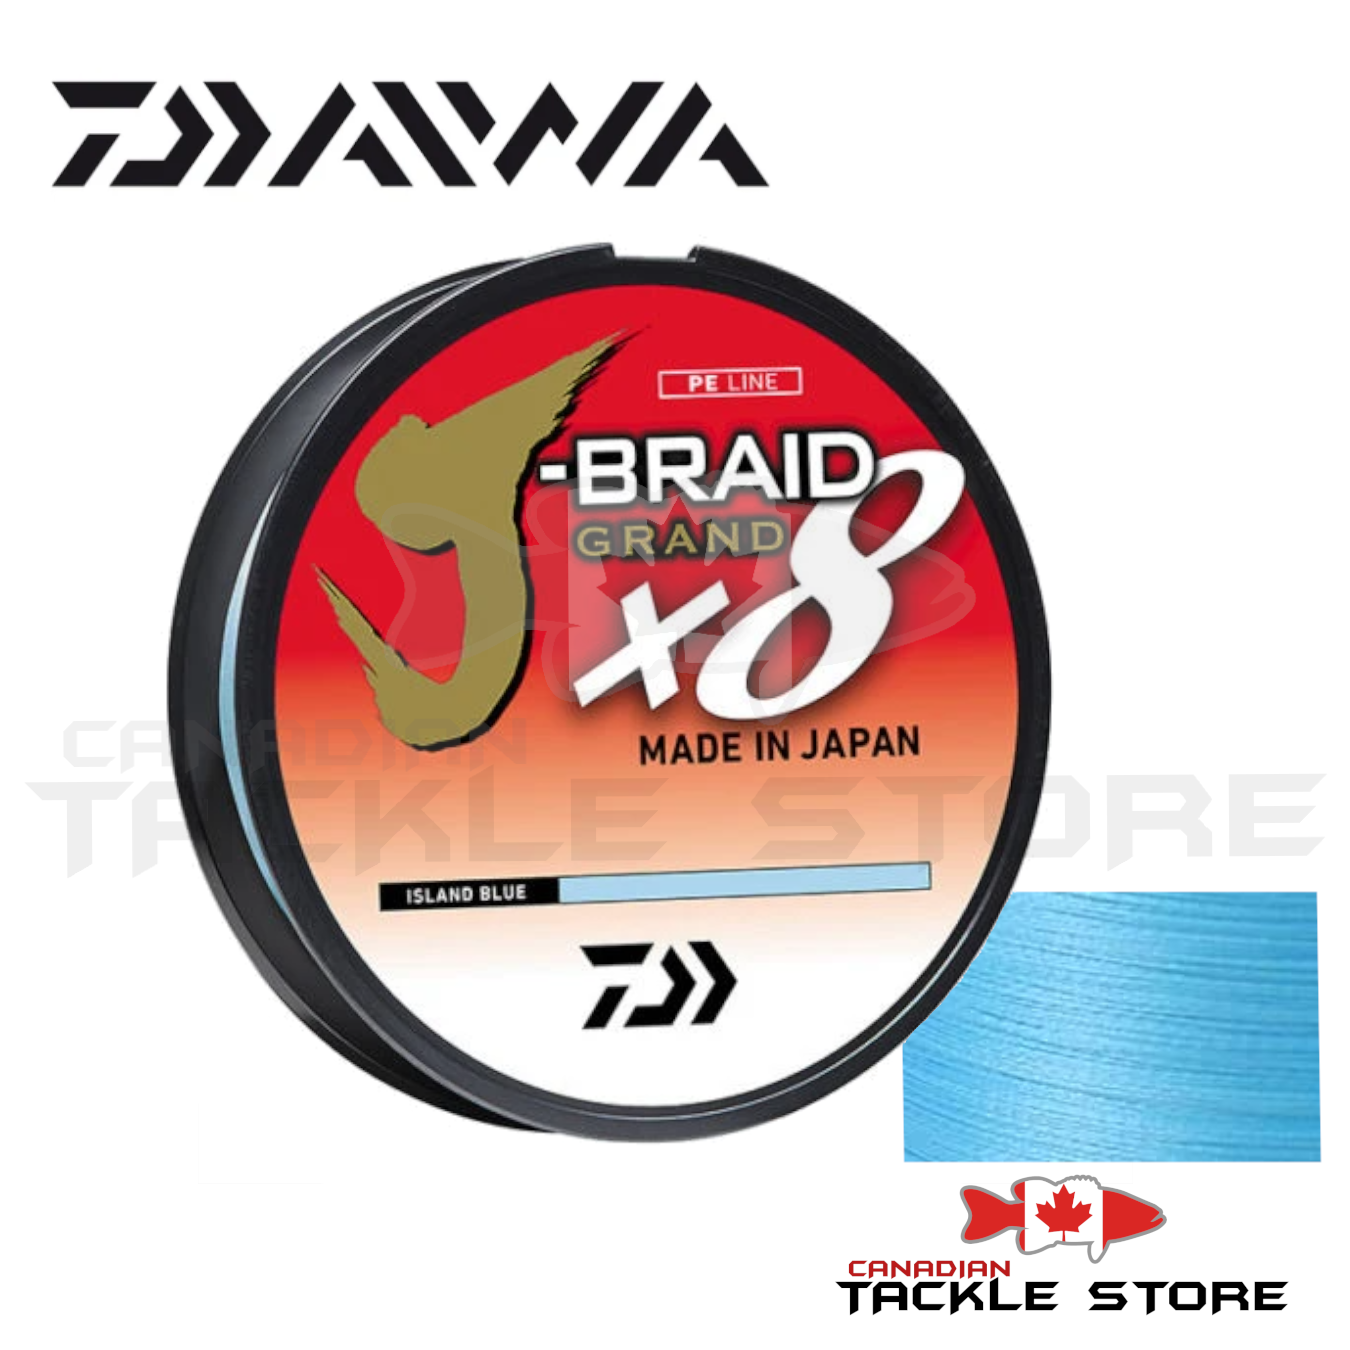 Braid – Canadian Tackle Store